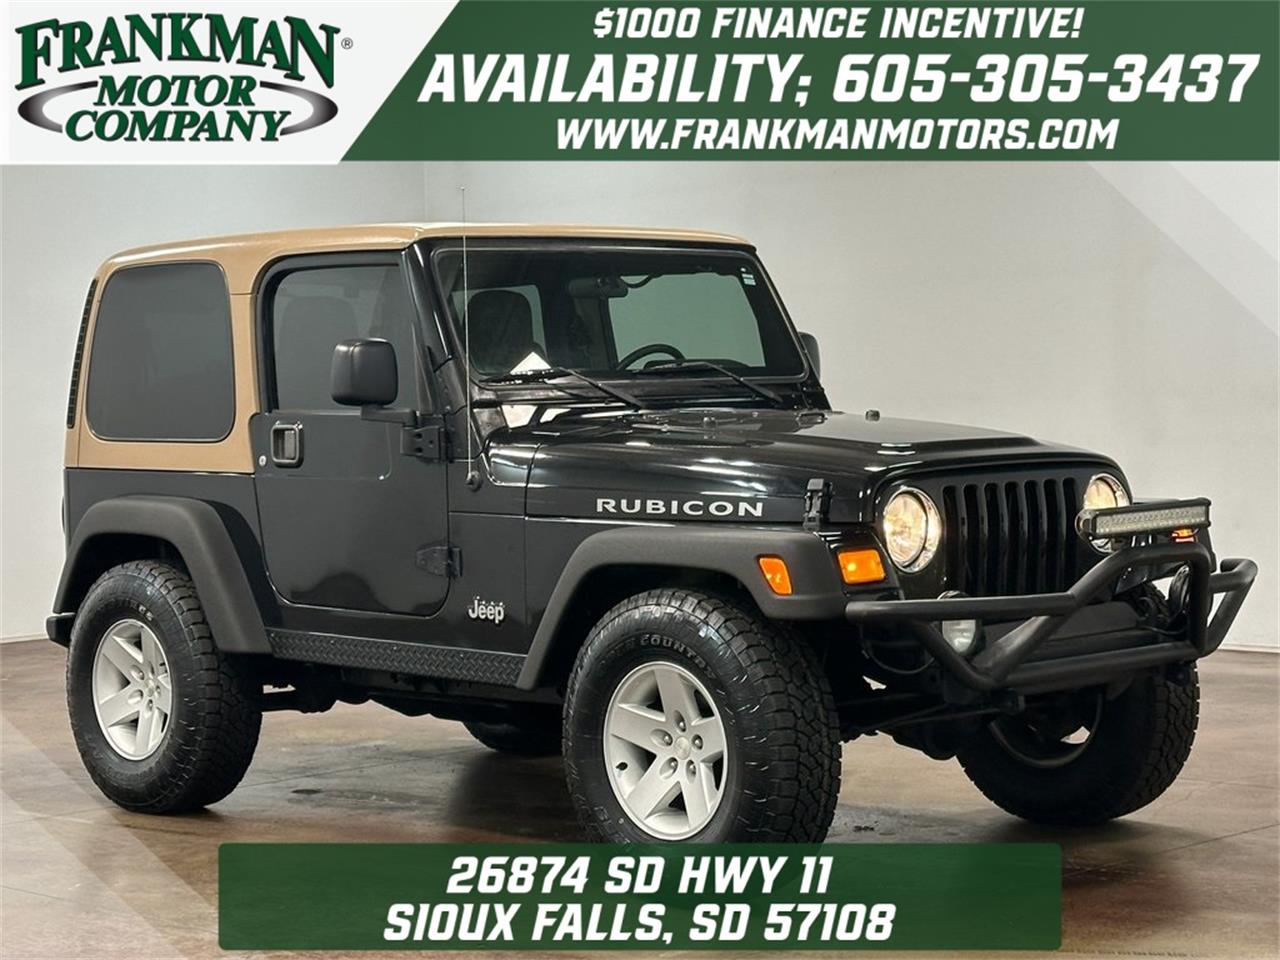 For Sale: 2004 Jeep Wrangler in Sioux Falls, South Dakota for sale in Sioux Falls, SD